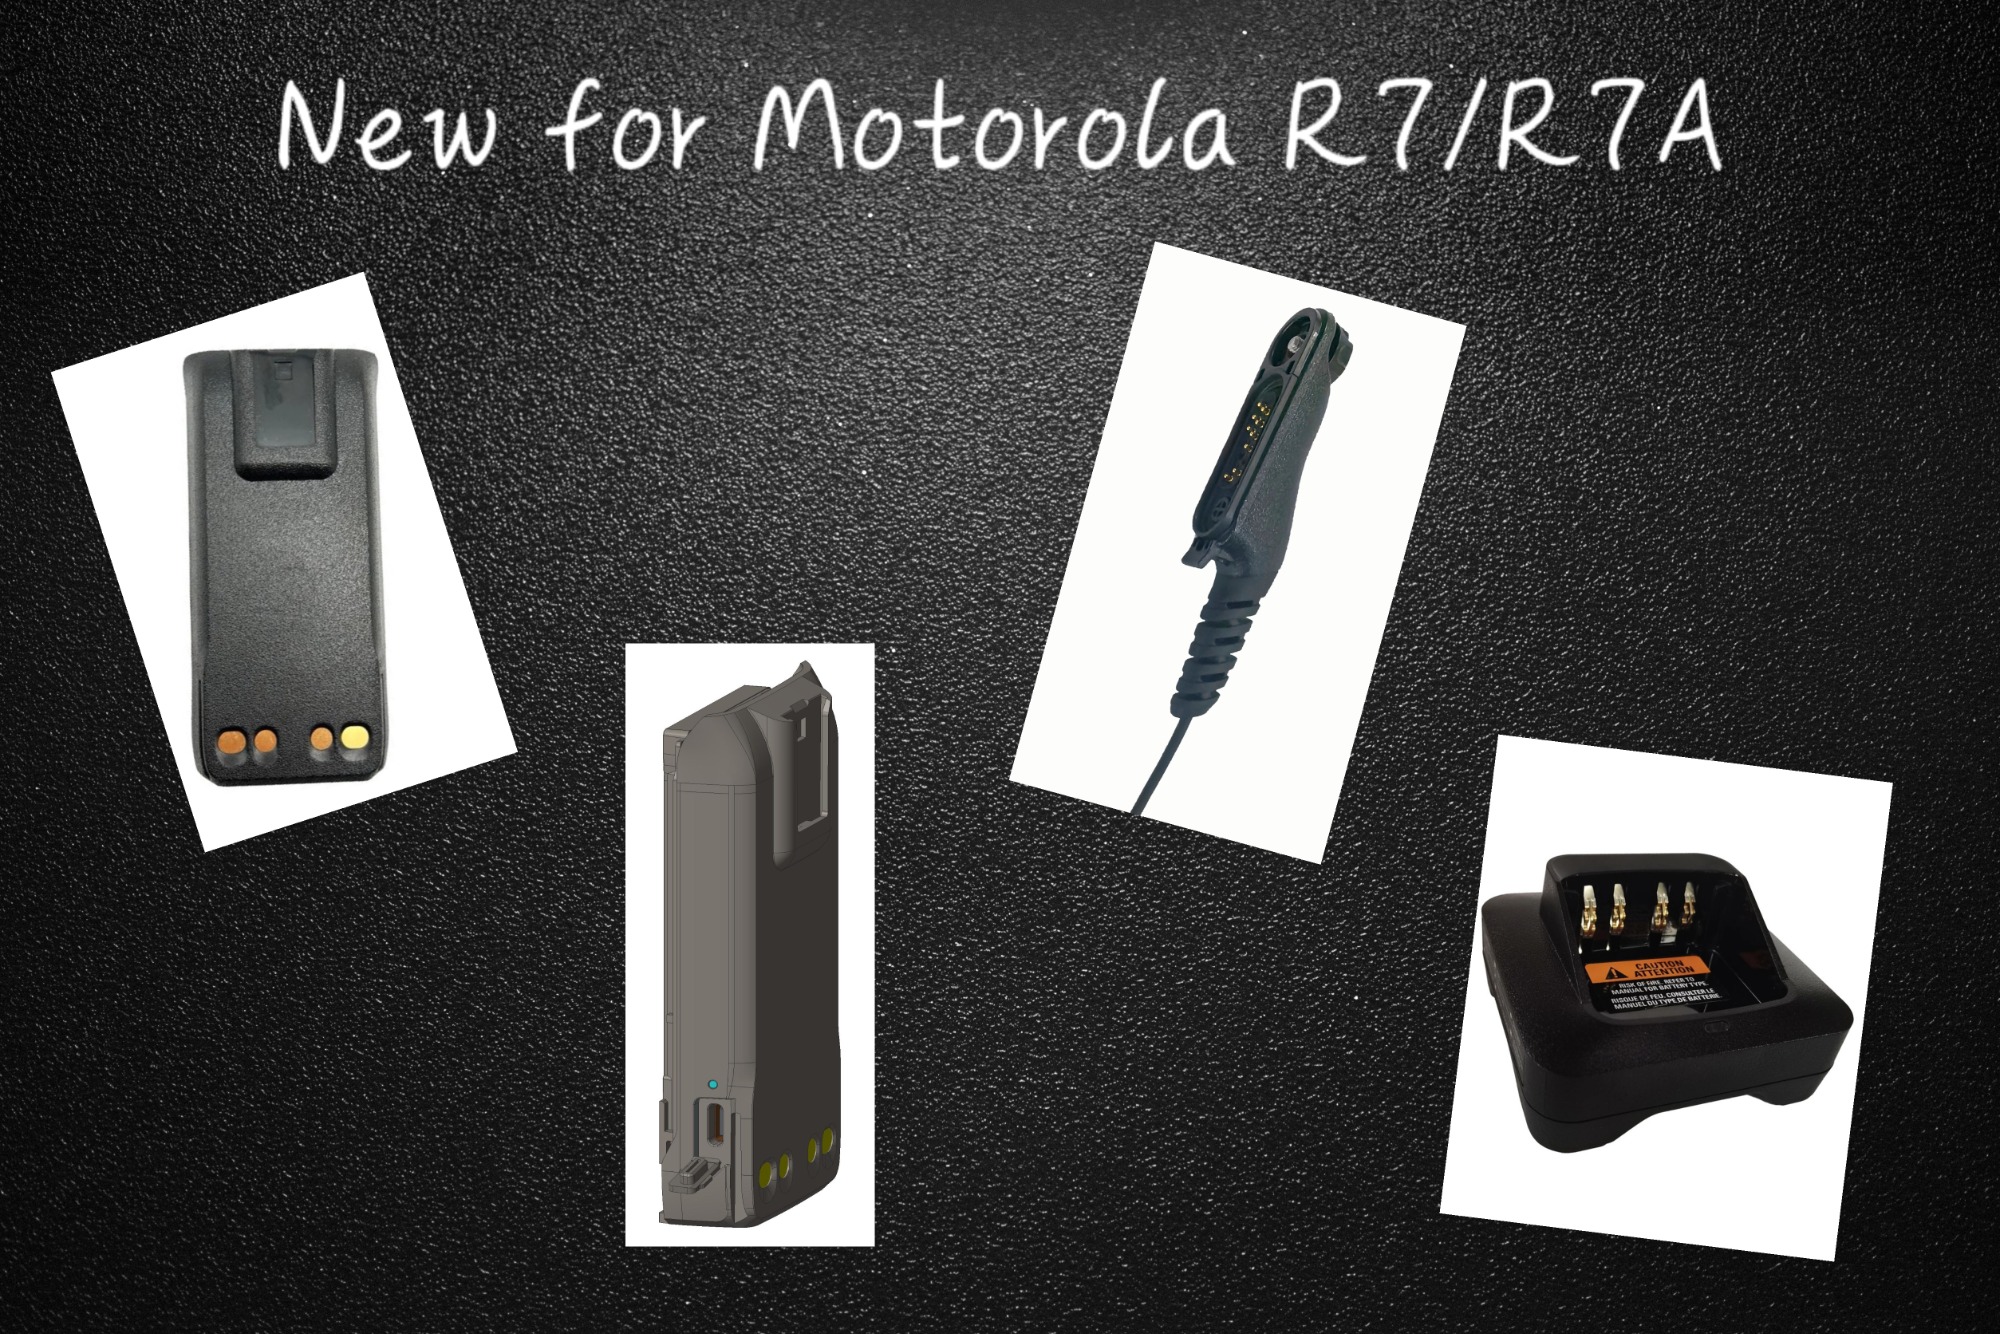 GPCOMM New Product Announcement: MOTOROLA R7/R7A Communication Accessories Now Available!